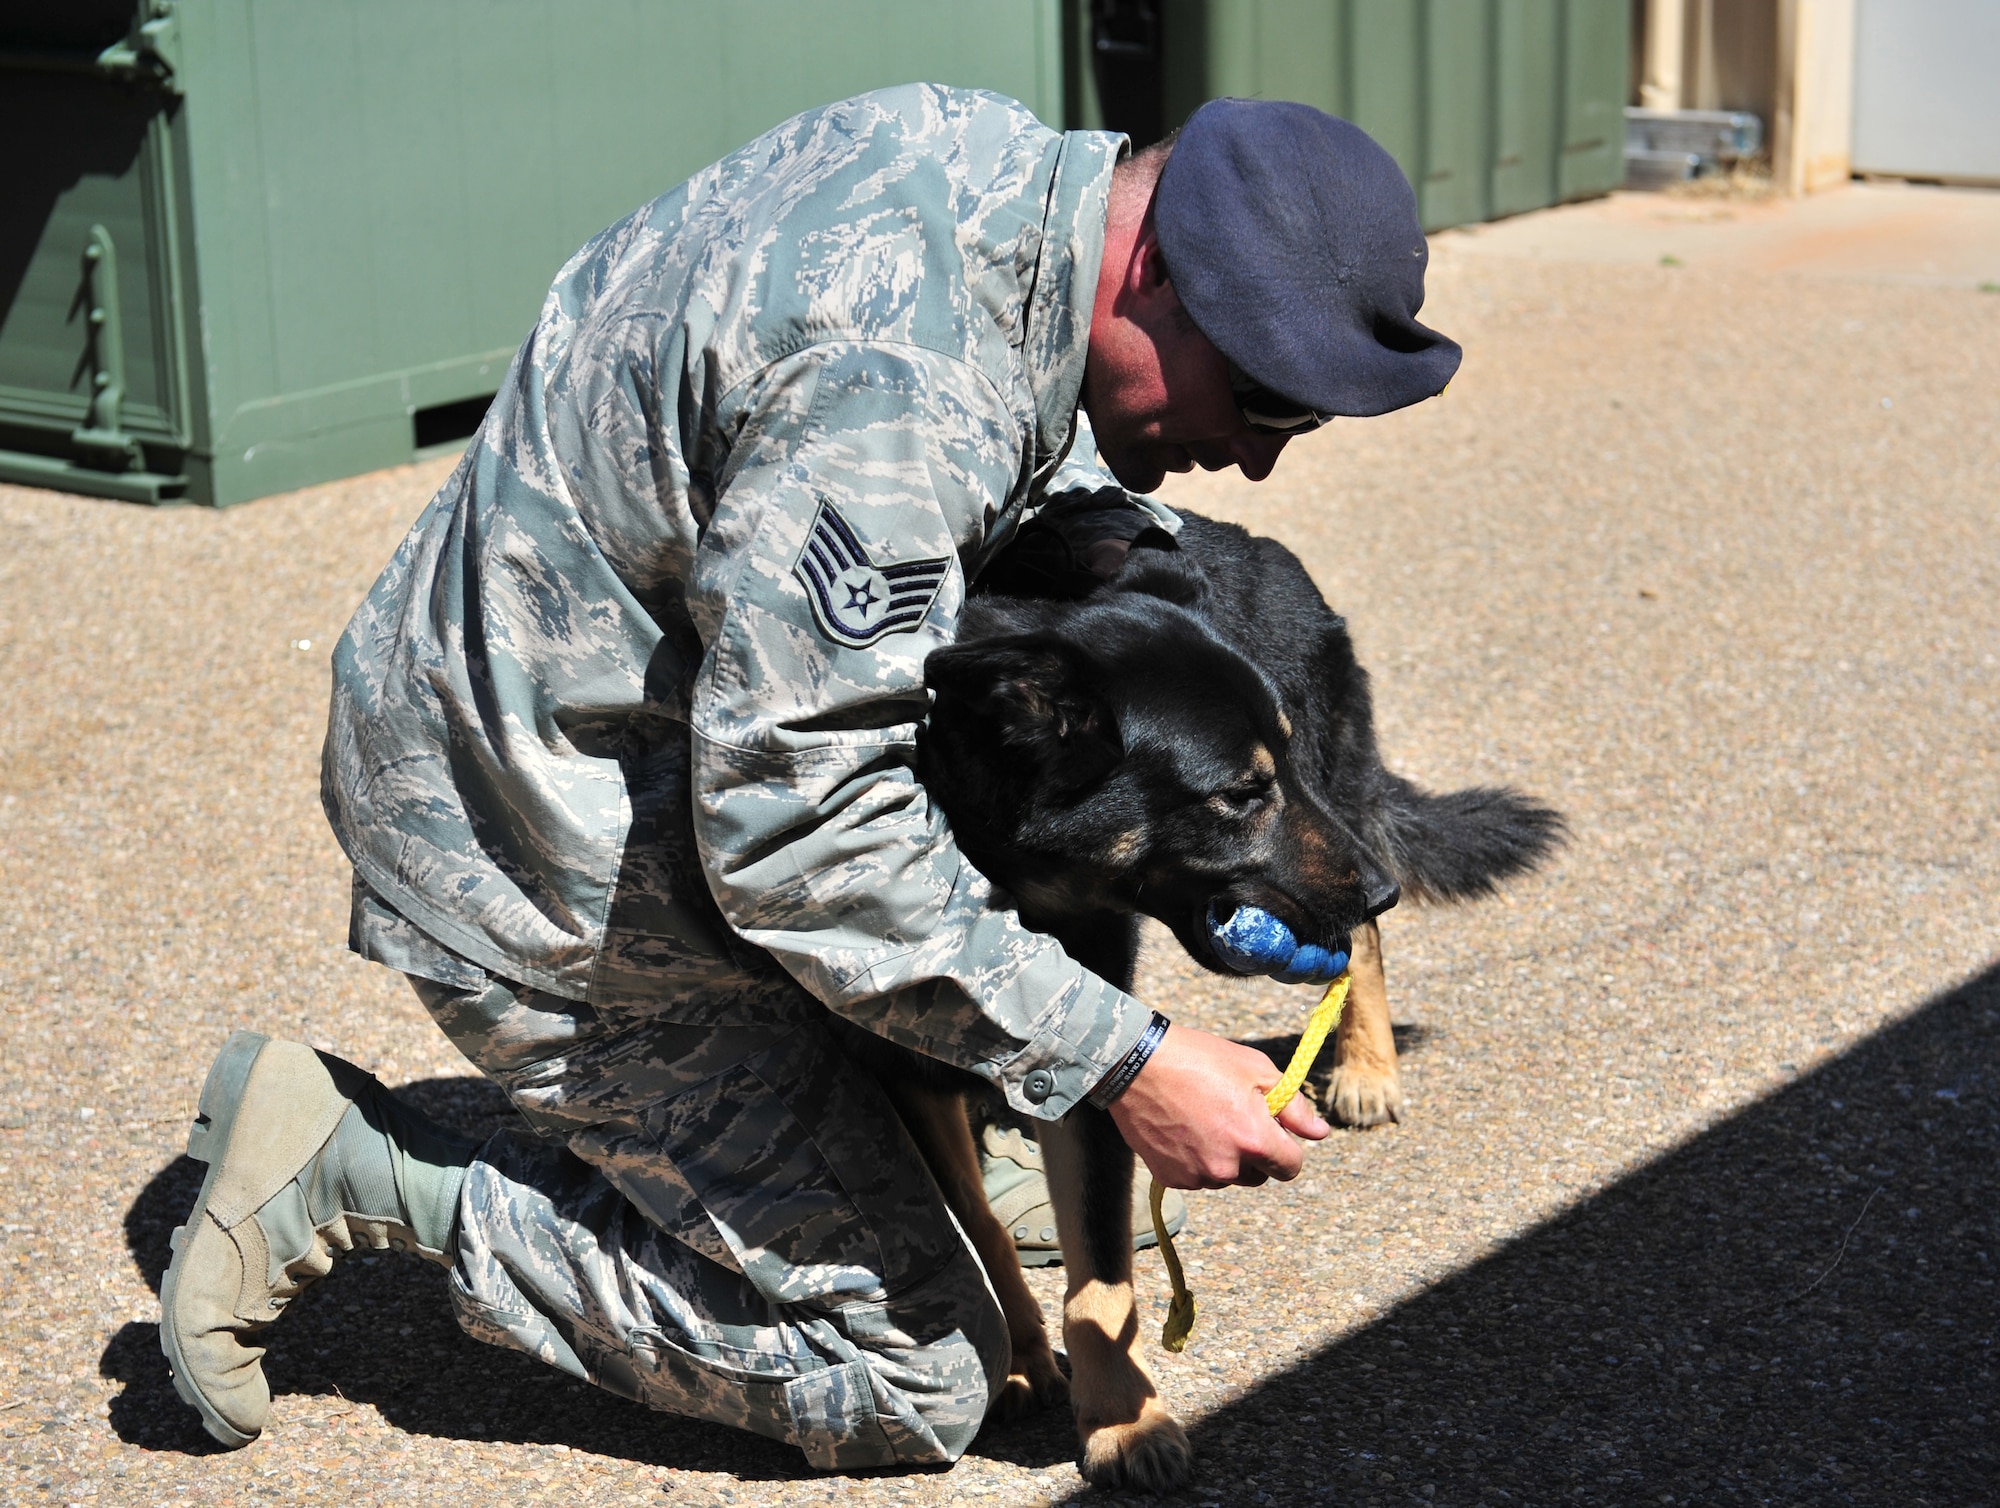 U.S. Air Force Staff Sgt. Adam Wylie, 27th Special Operations Security Forces Squadron military working dog handler, praises and rewards K-9 unit Dino K014 with a rubber Kong chew toy after locating a training aid at Cannon Air Force Base, N.M., March 15, 2012. Training aids can either be drugs or explosives based on what the dog?s certifications are. (U.S. Air Force photo by Airman 1st Class Alexxis Pons Abascal)